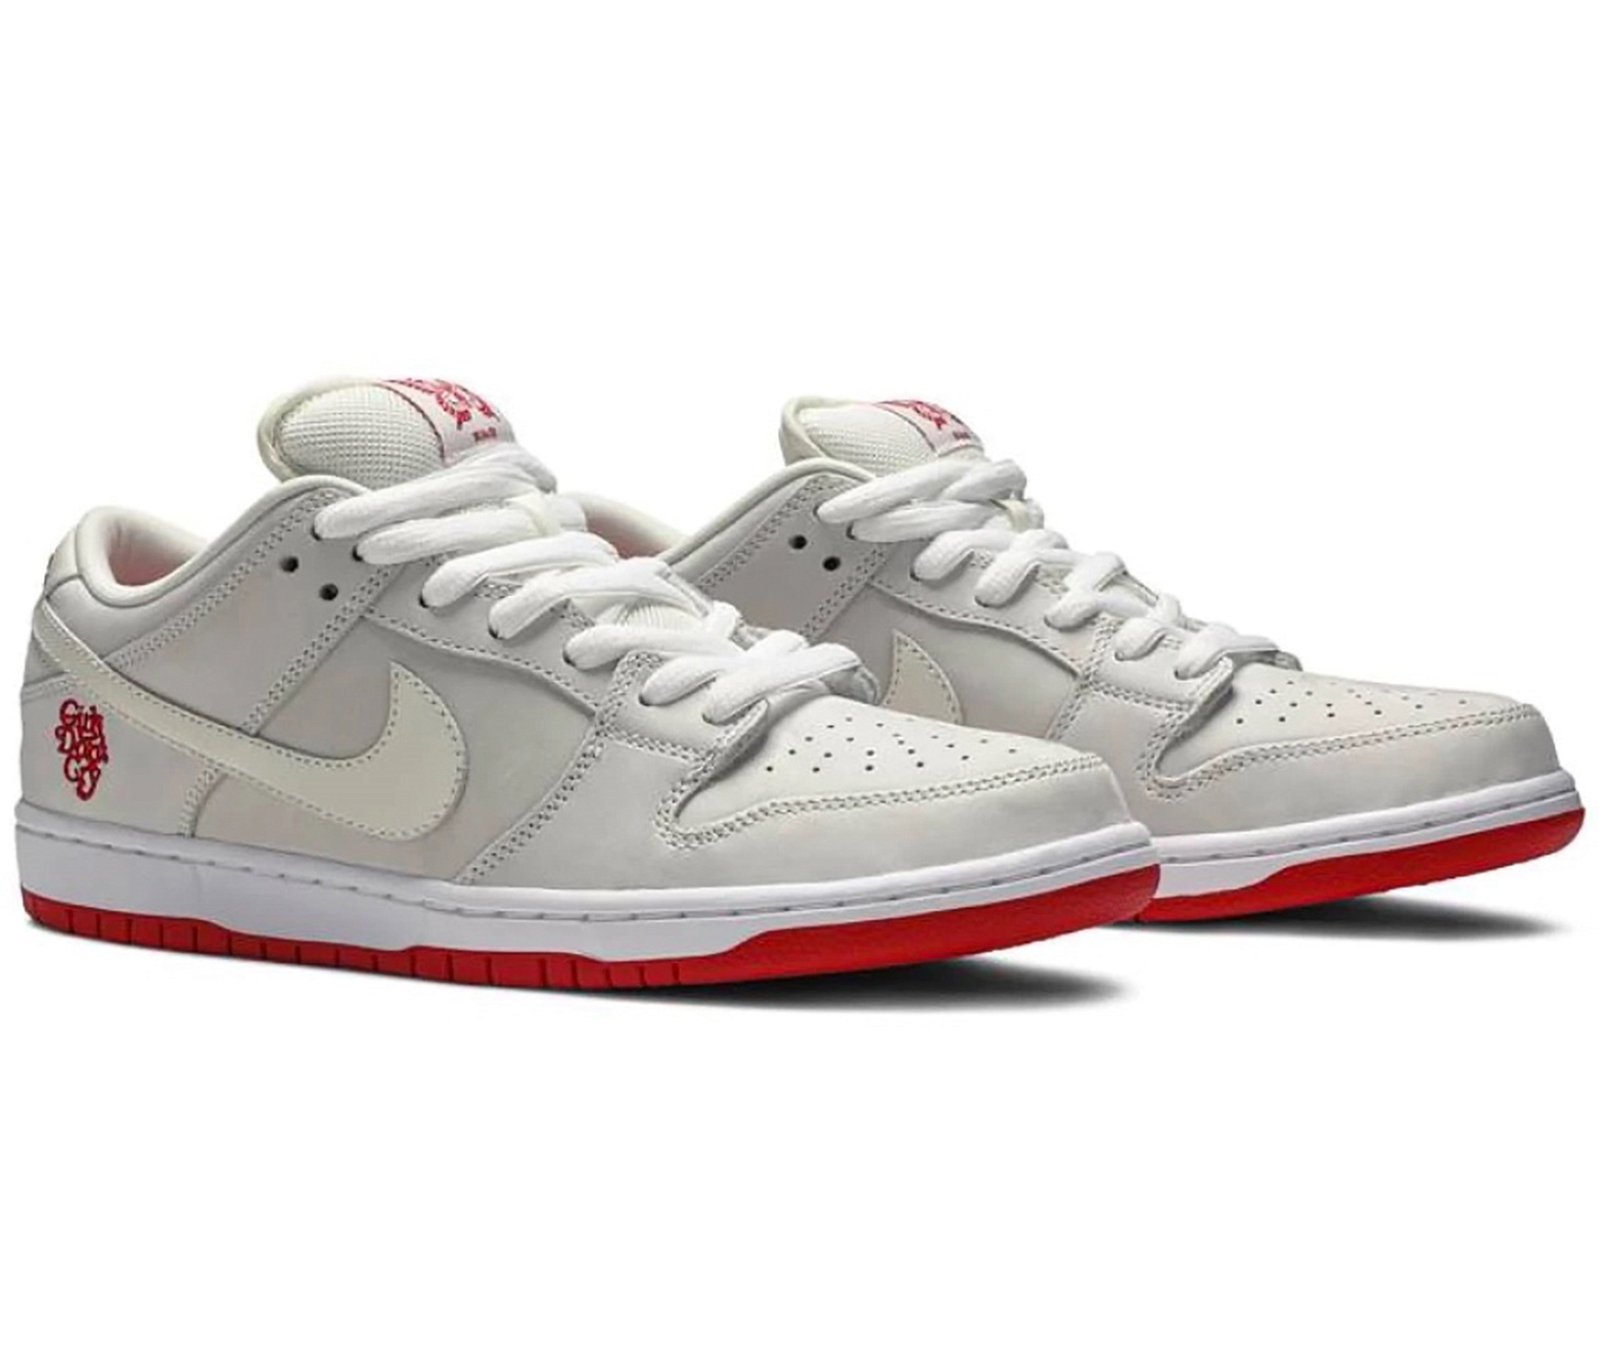 Nike SB Dunk Low Girls Don't Cry (F&F) sneaker informations